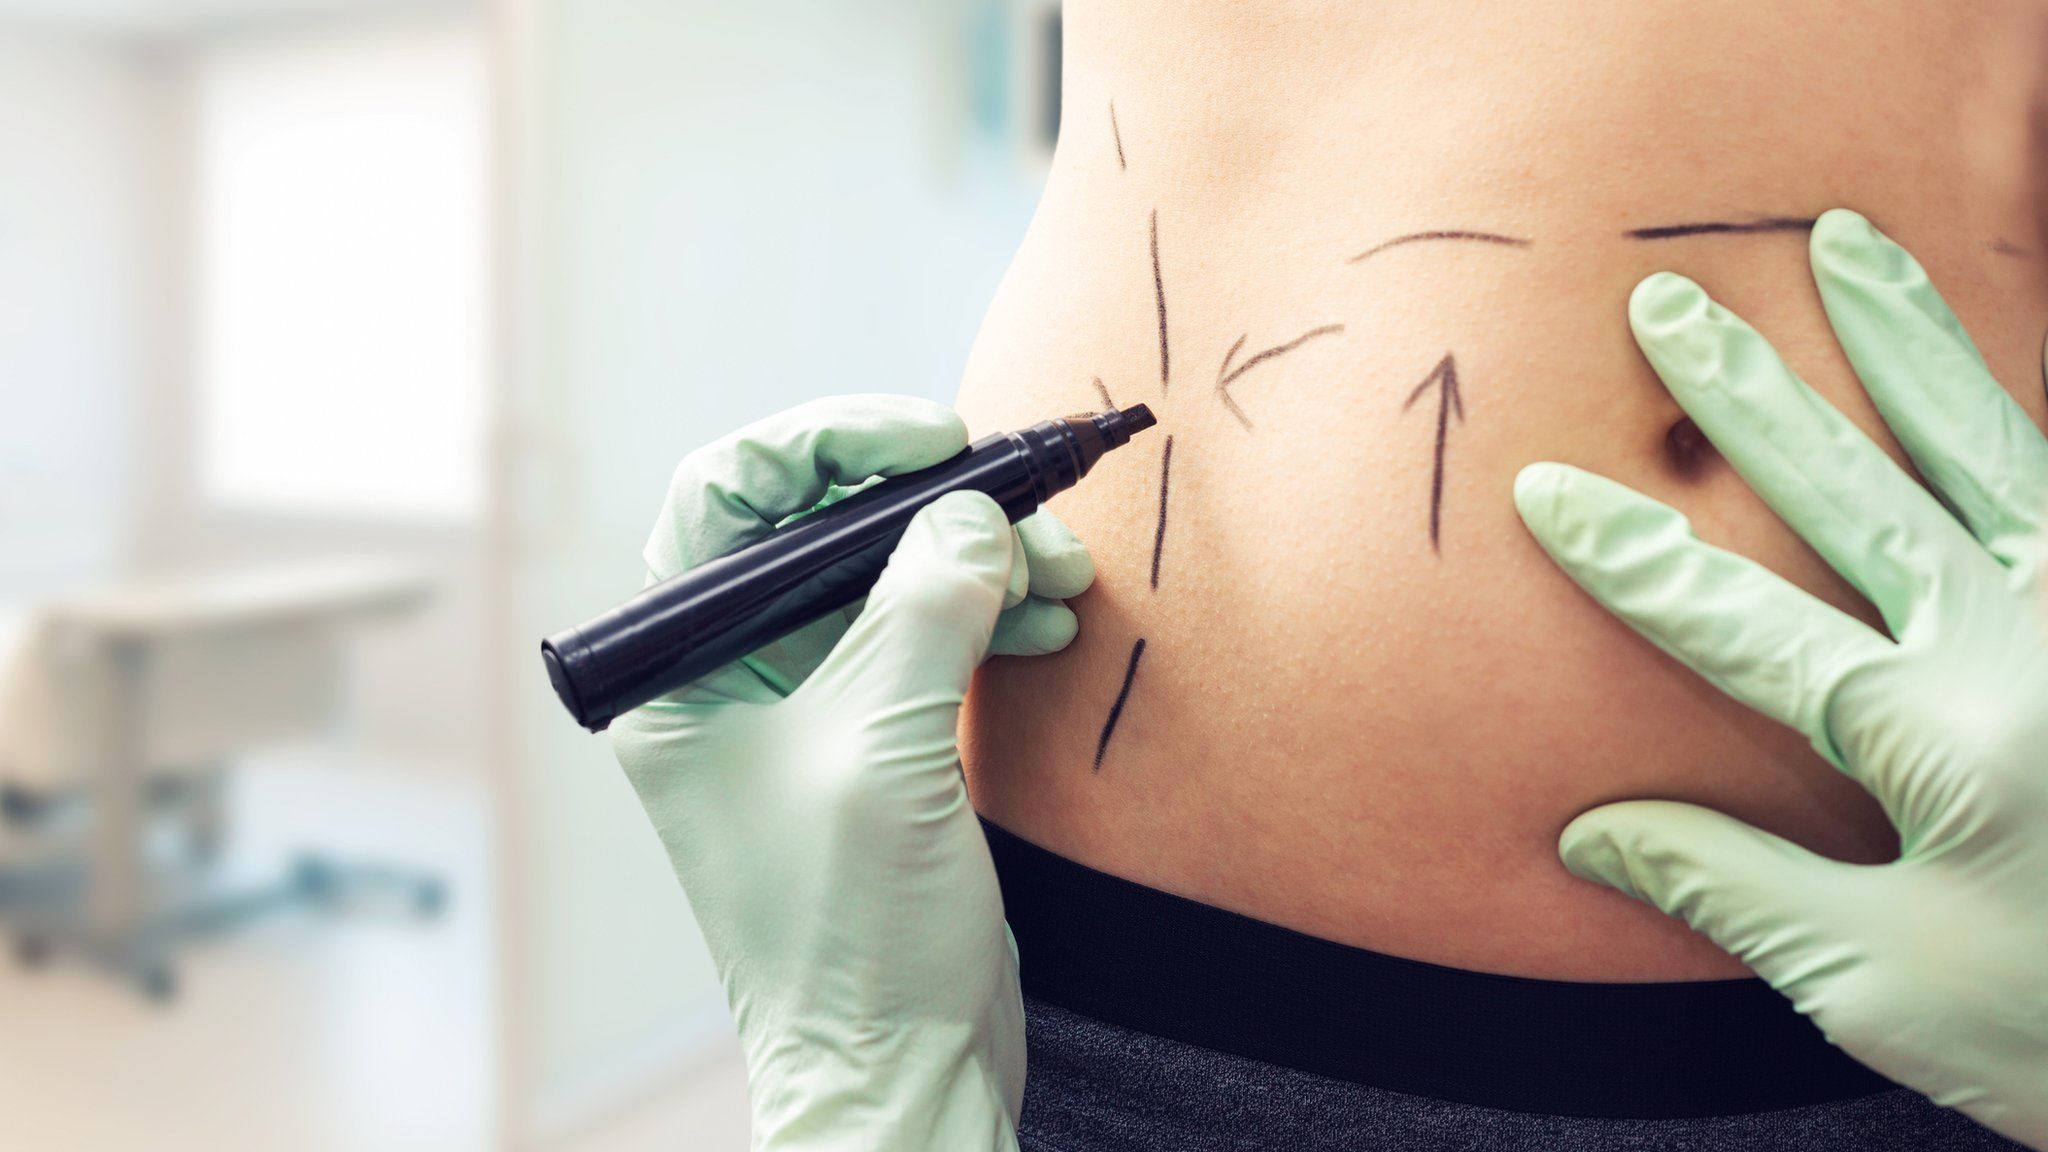 A patient is marked up for liposuction